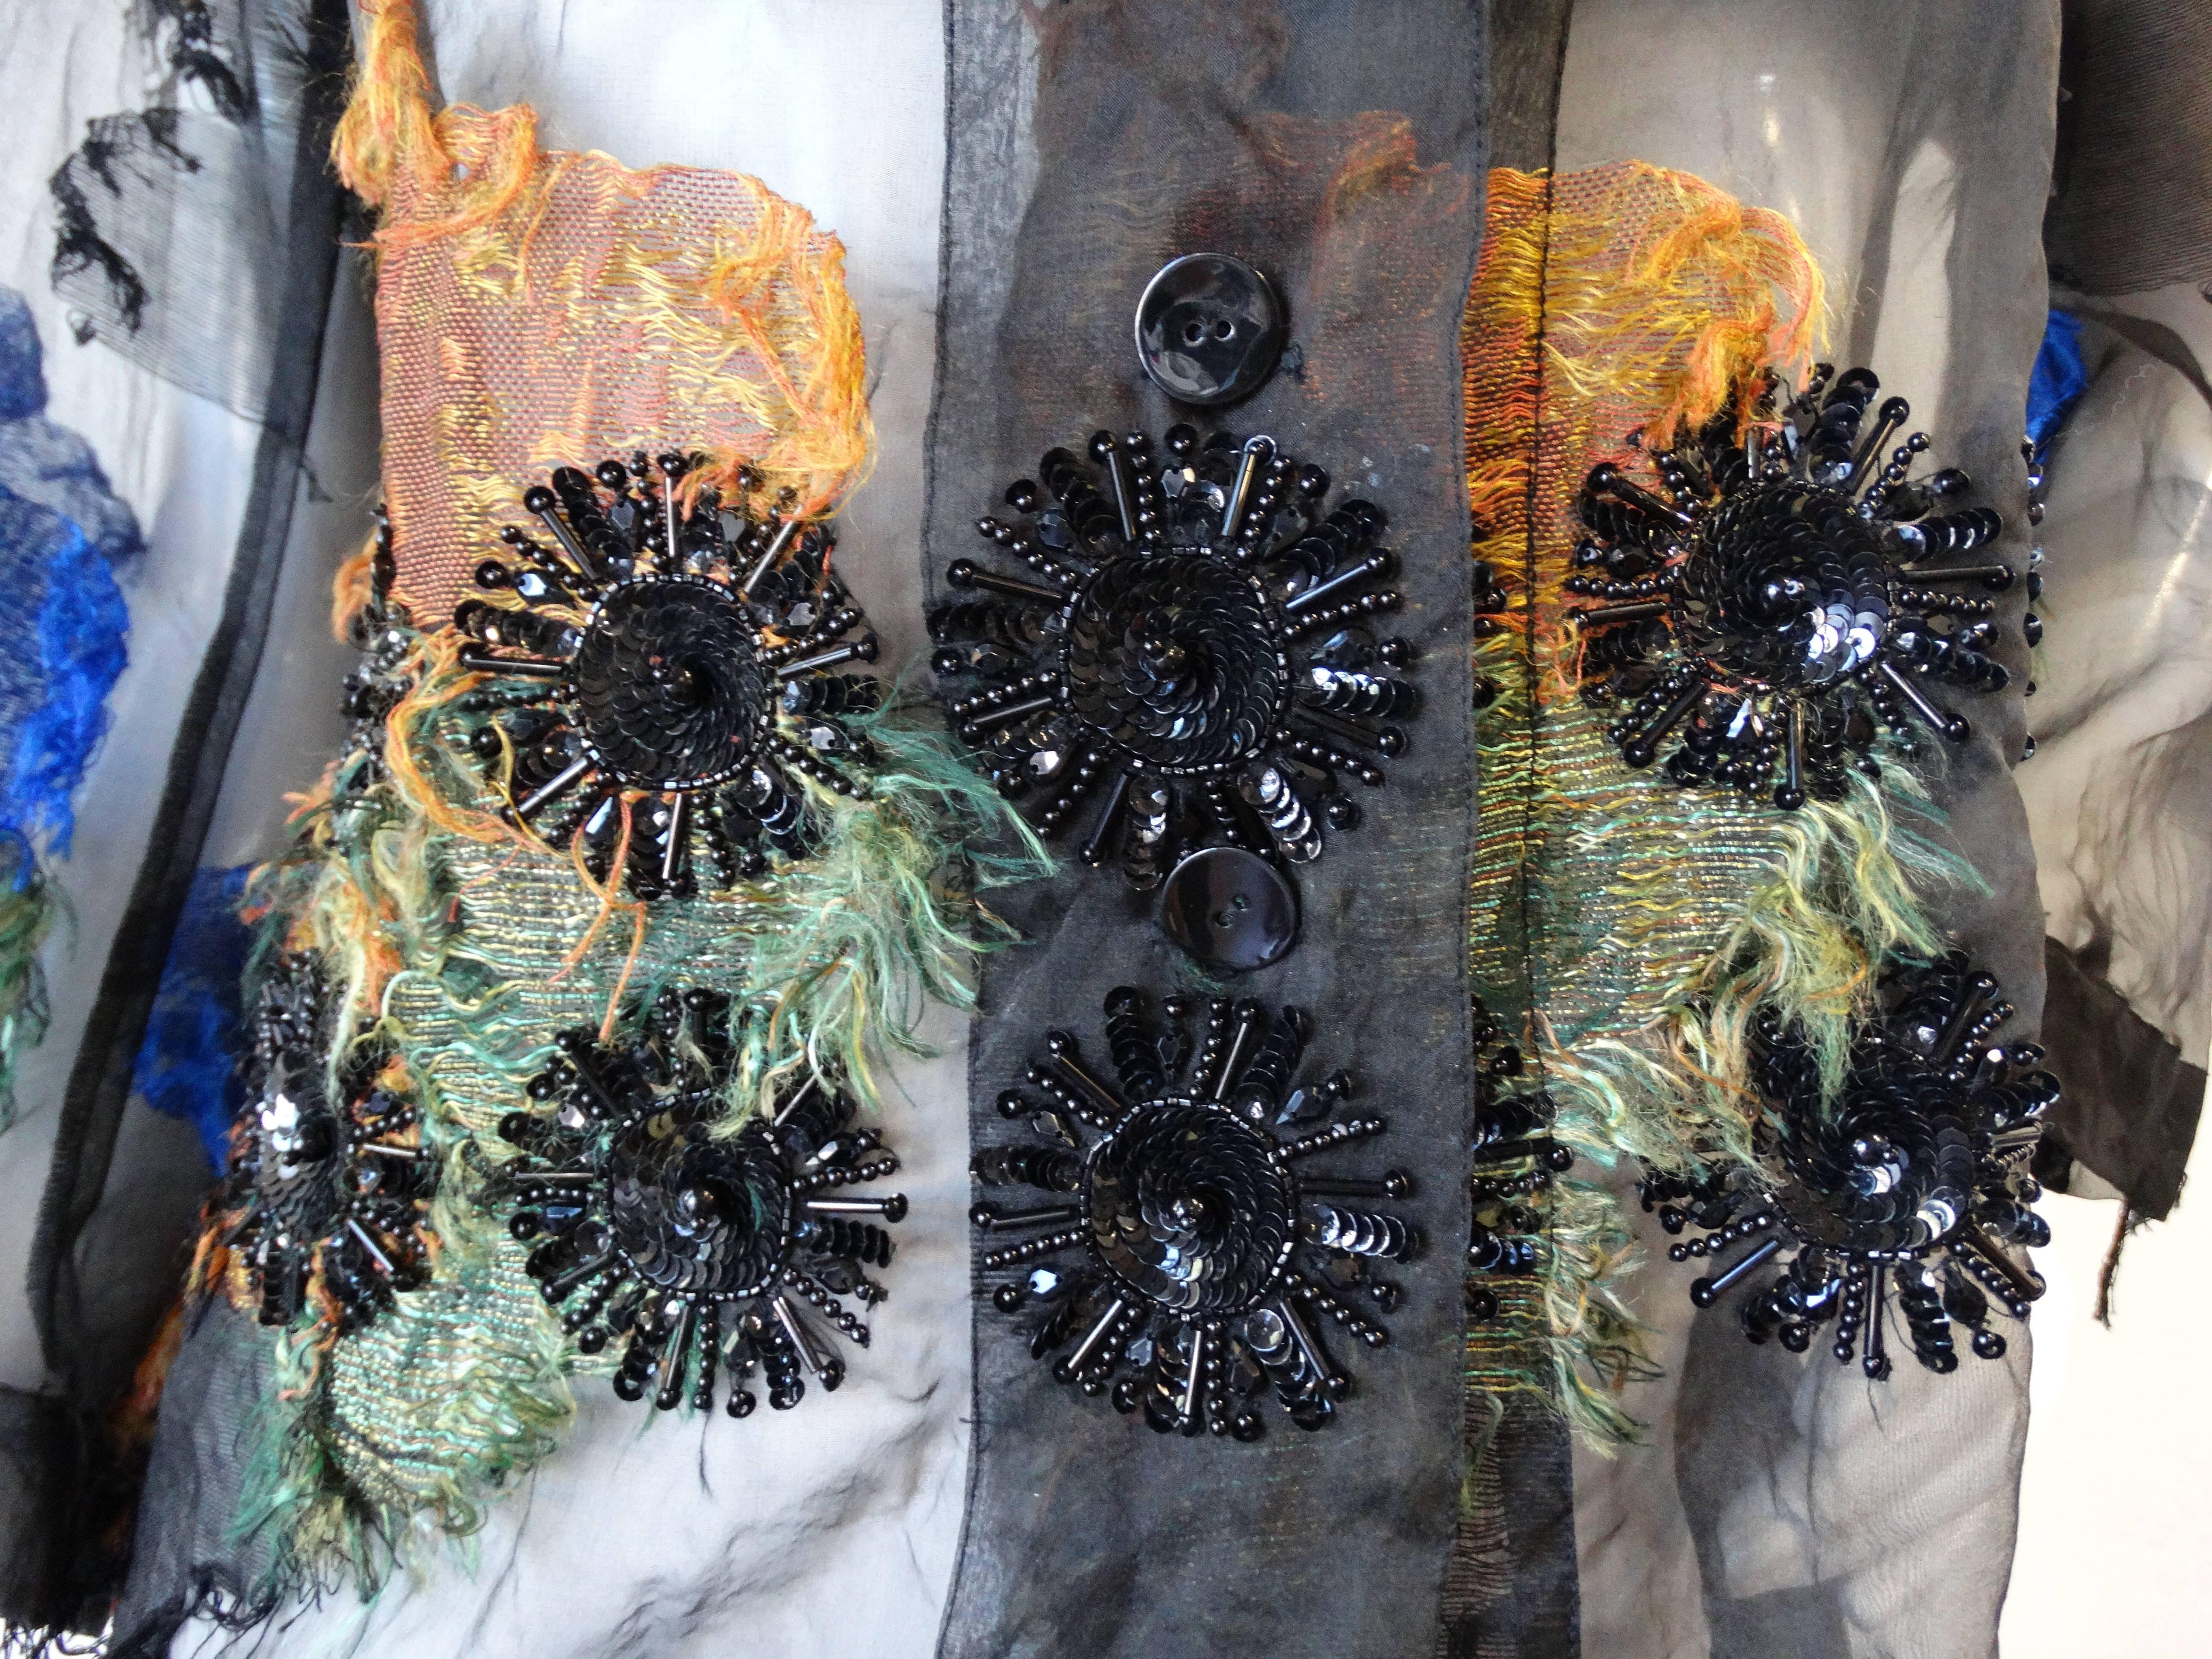 Don't miss out on this amazing Dries Van Noten embellished blouse! Made of a sexy sheer black fabric with patches of blue, green and orange embroidery, each with various distressing texture. Two rows of mandalas of black floral-like beading around